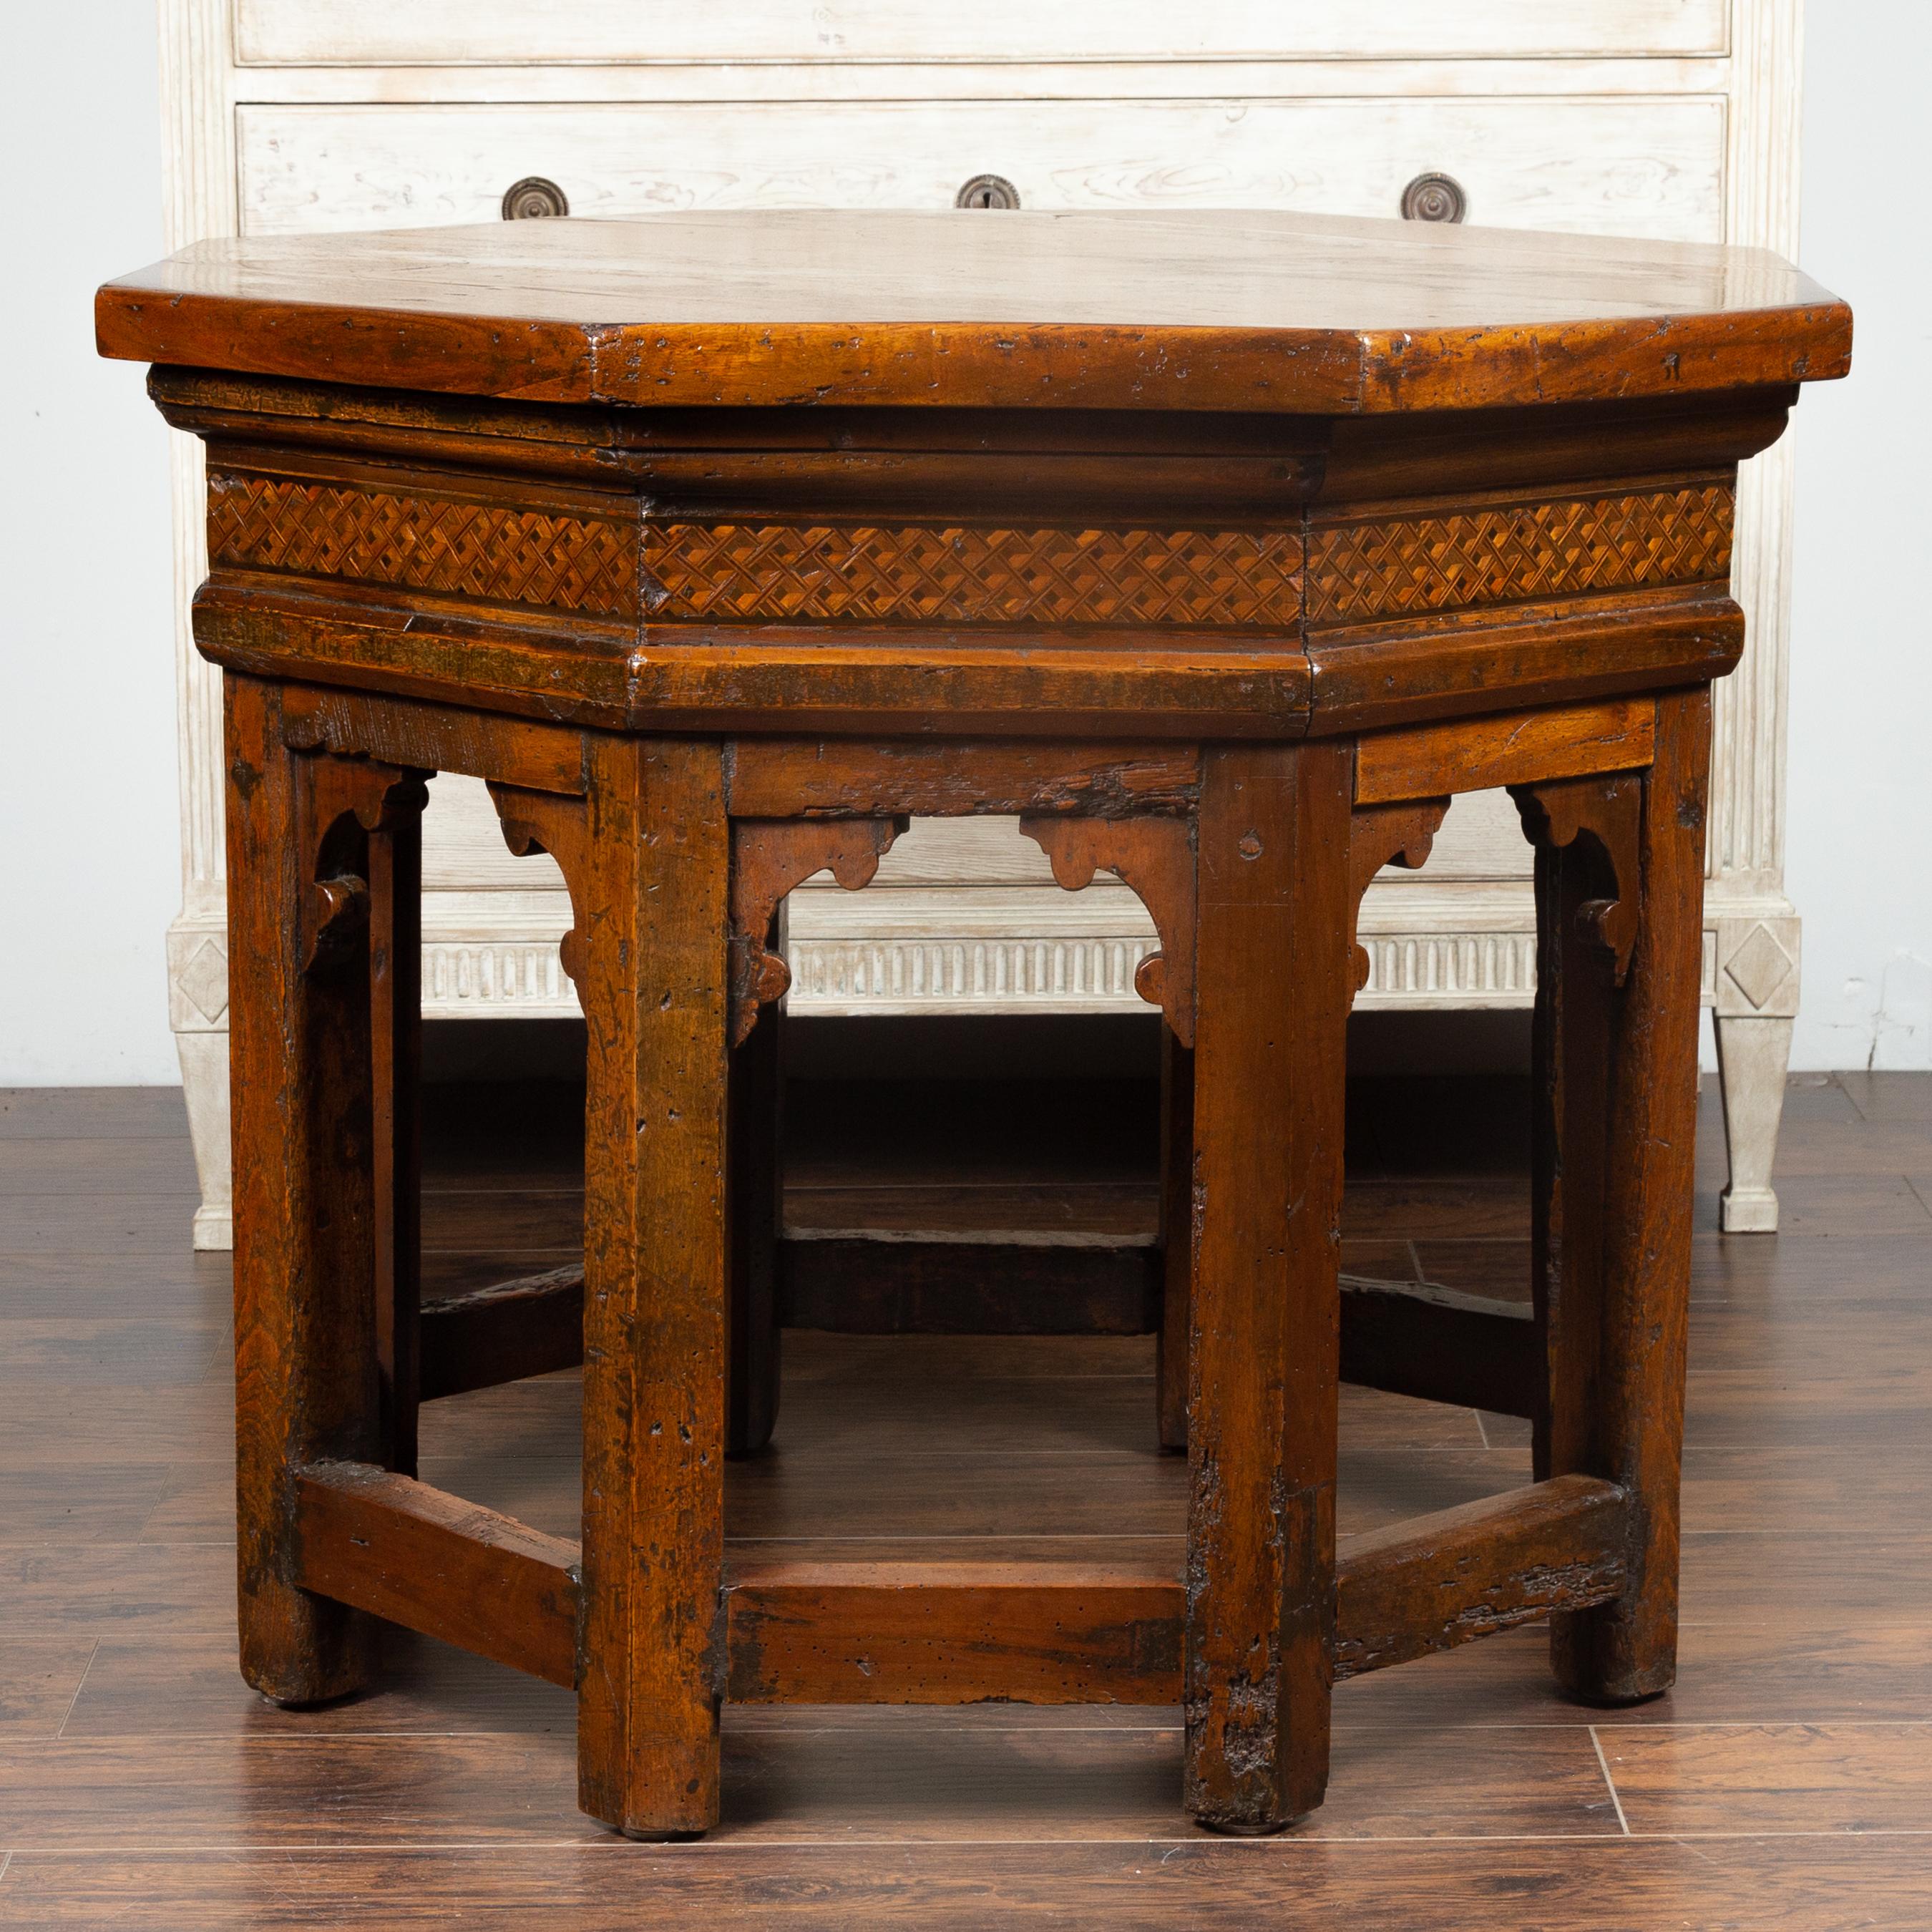 An Italian walnut octagonal center table from the mid-19th century (or earlier), with geometrical inlay. We have a near pair available with slight variations in the dimensions, please check item LU836716746041. Born in Italy during the 19th century,